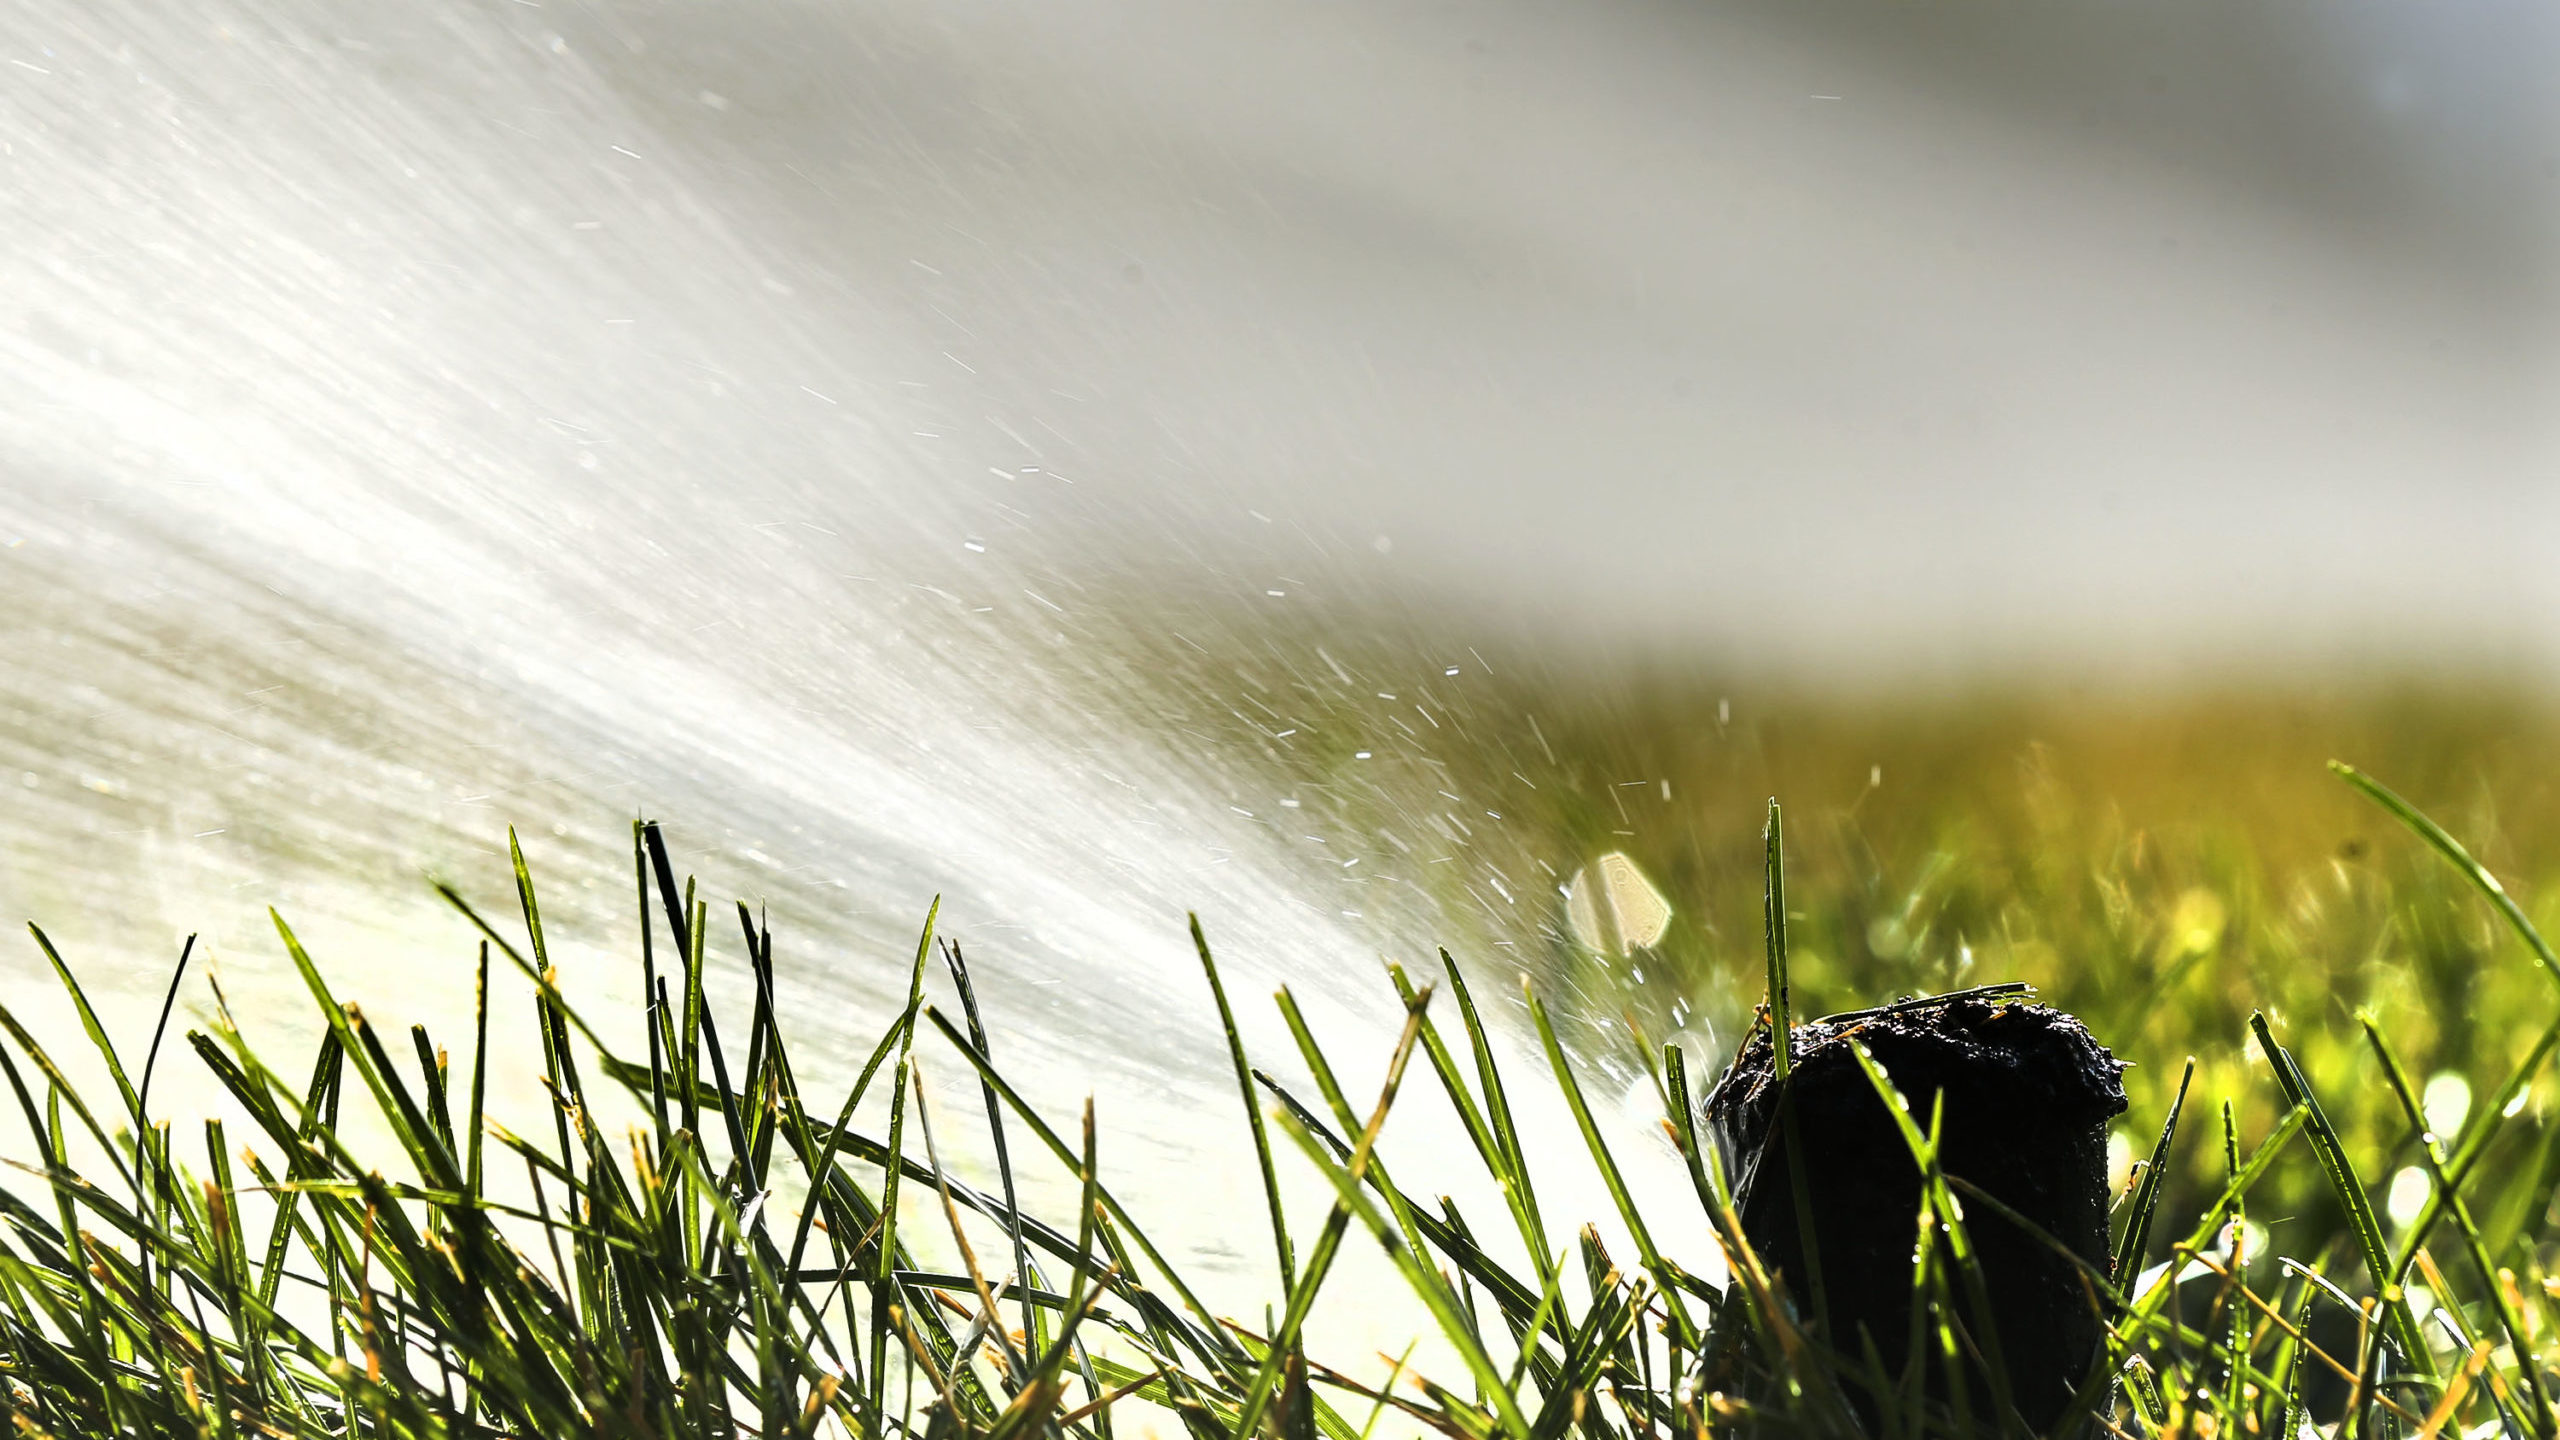 a sprinkler shoots water over grass, utah drought conditions have improved...